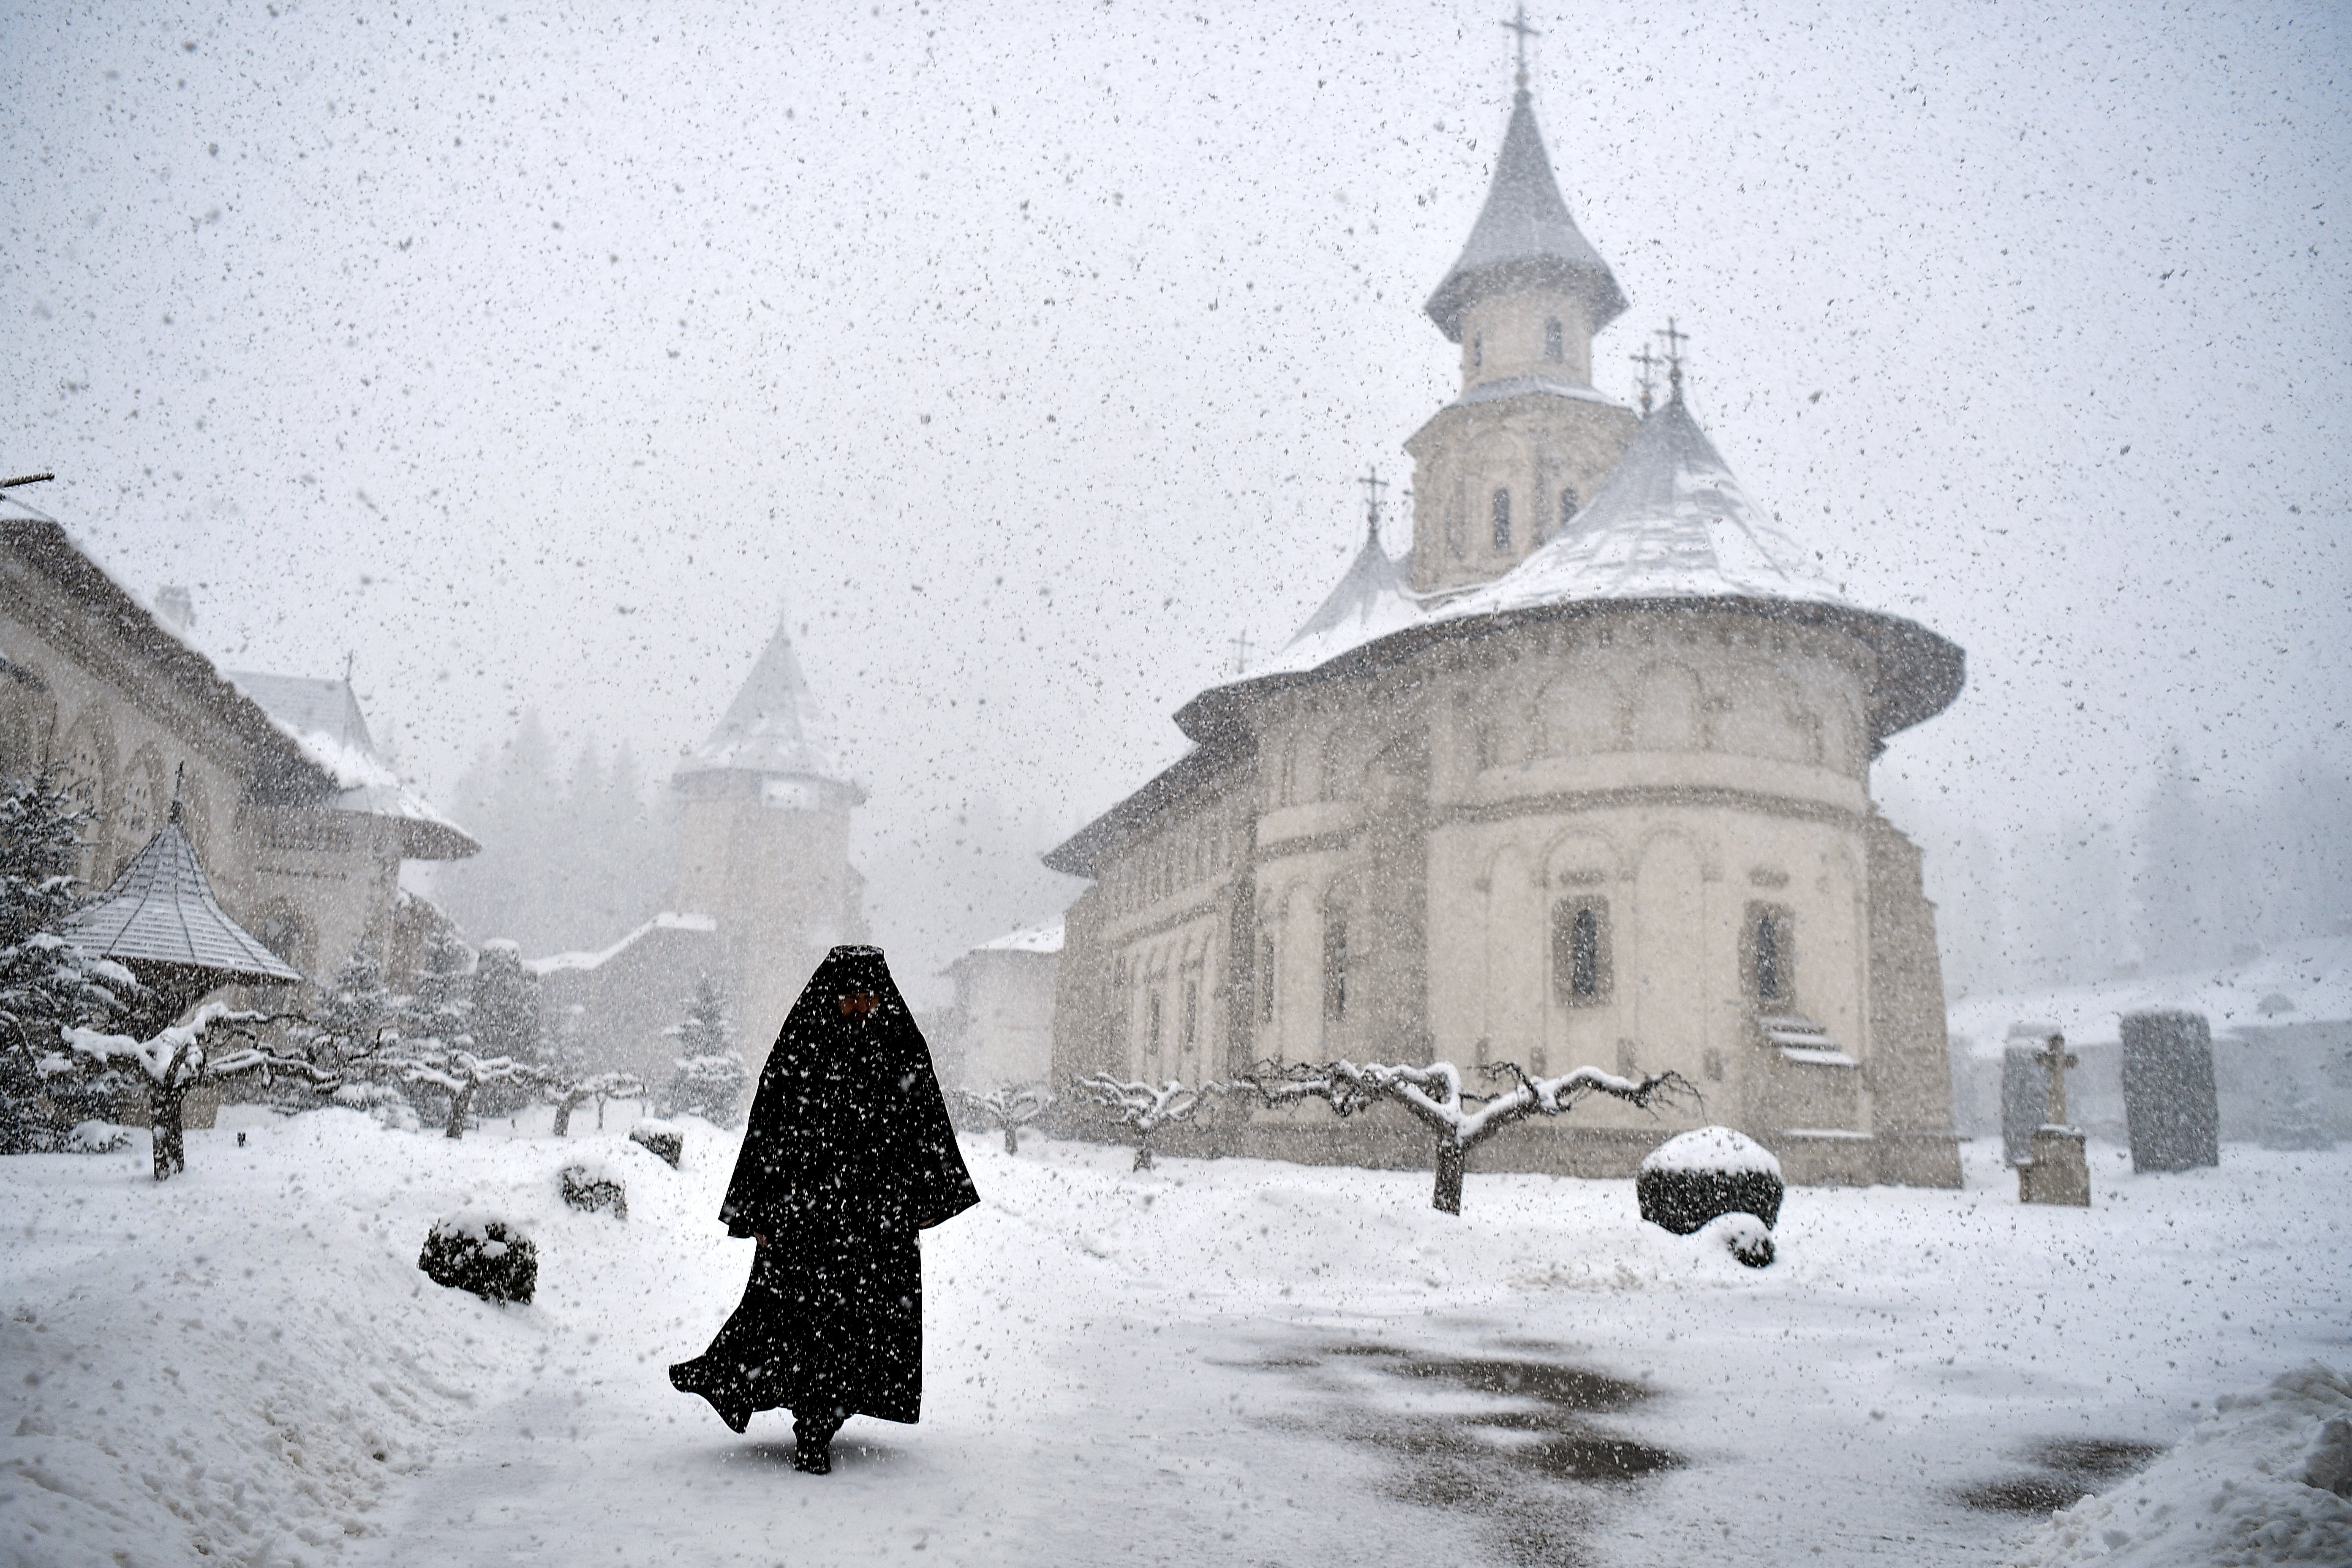 Romanian Orthodox monk Father Mikhail departs after mass at the church in Putna monastery, Romania